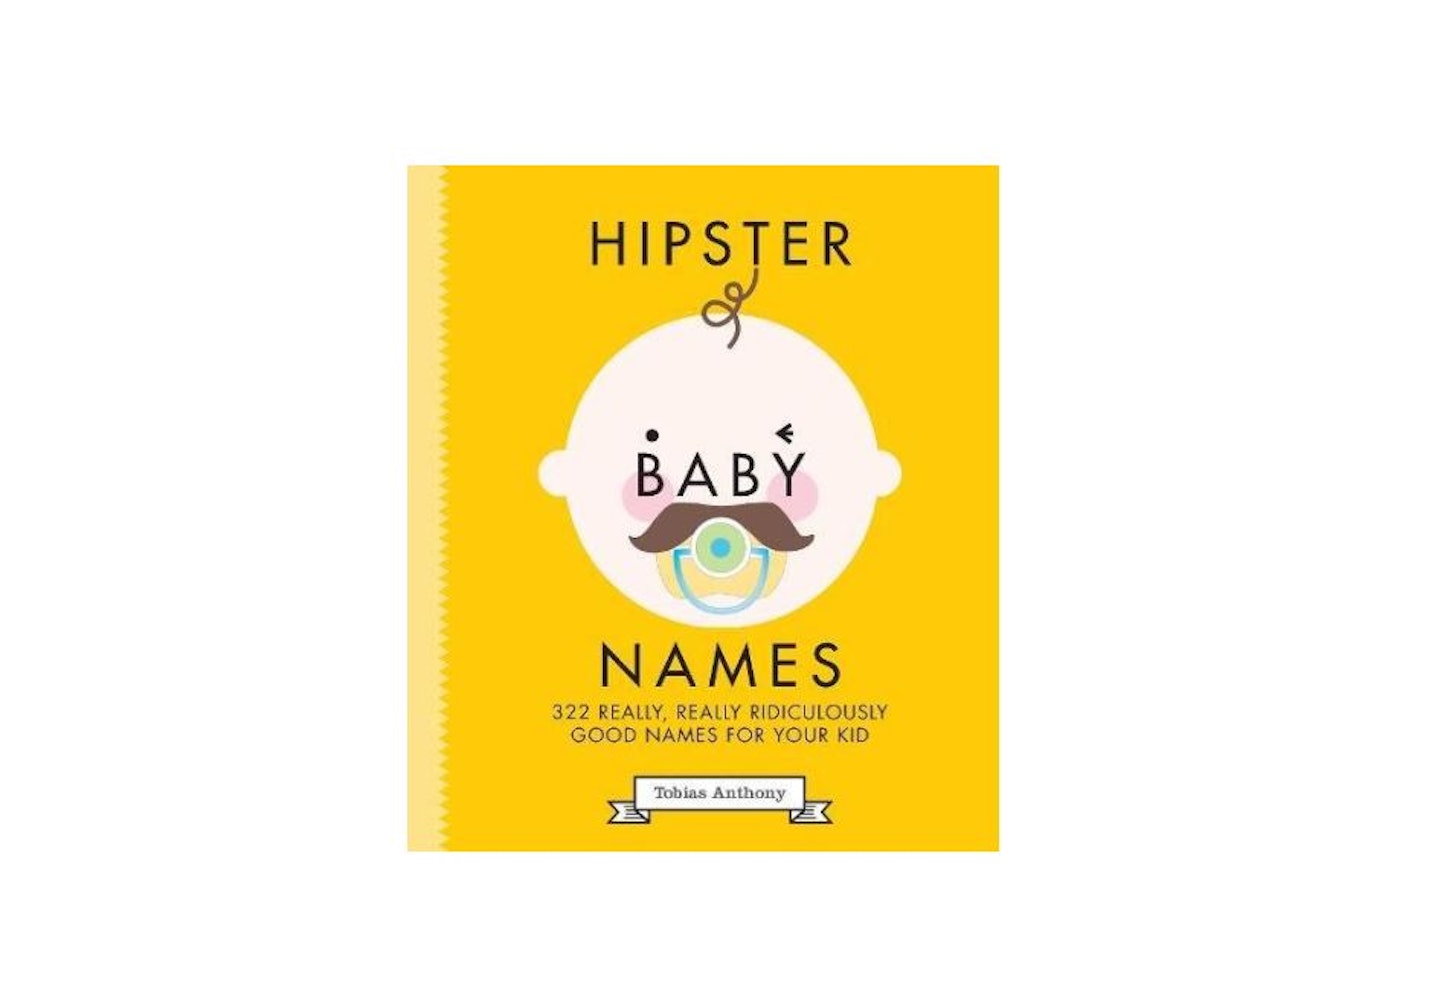 Hipster Baby Names, 9.99